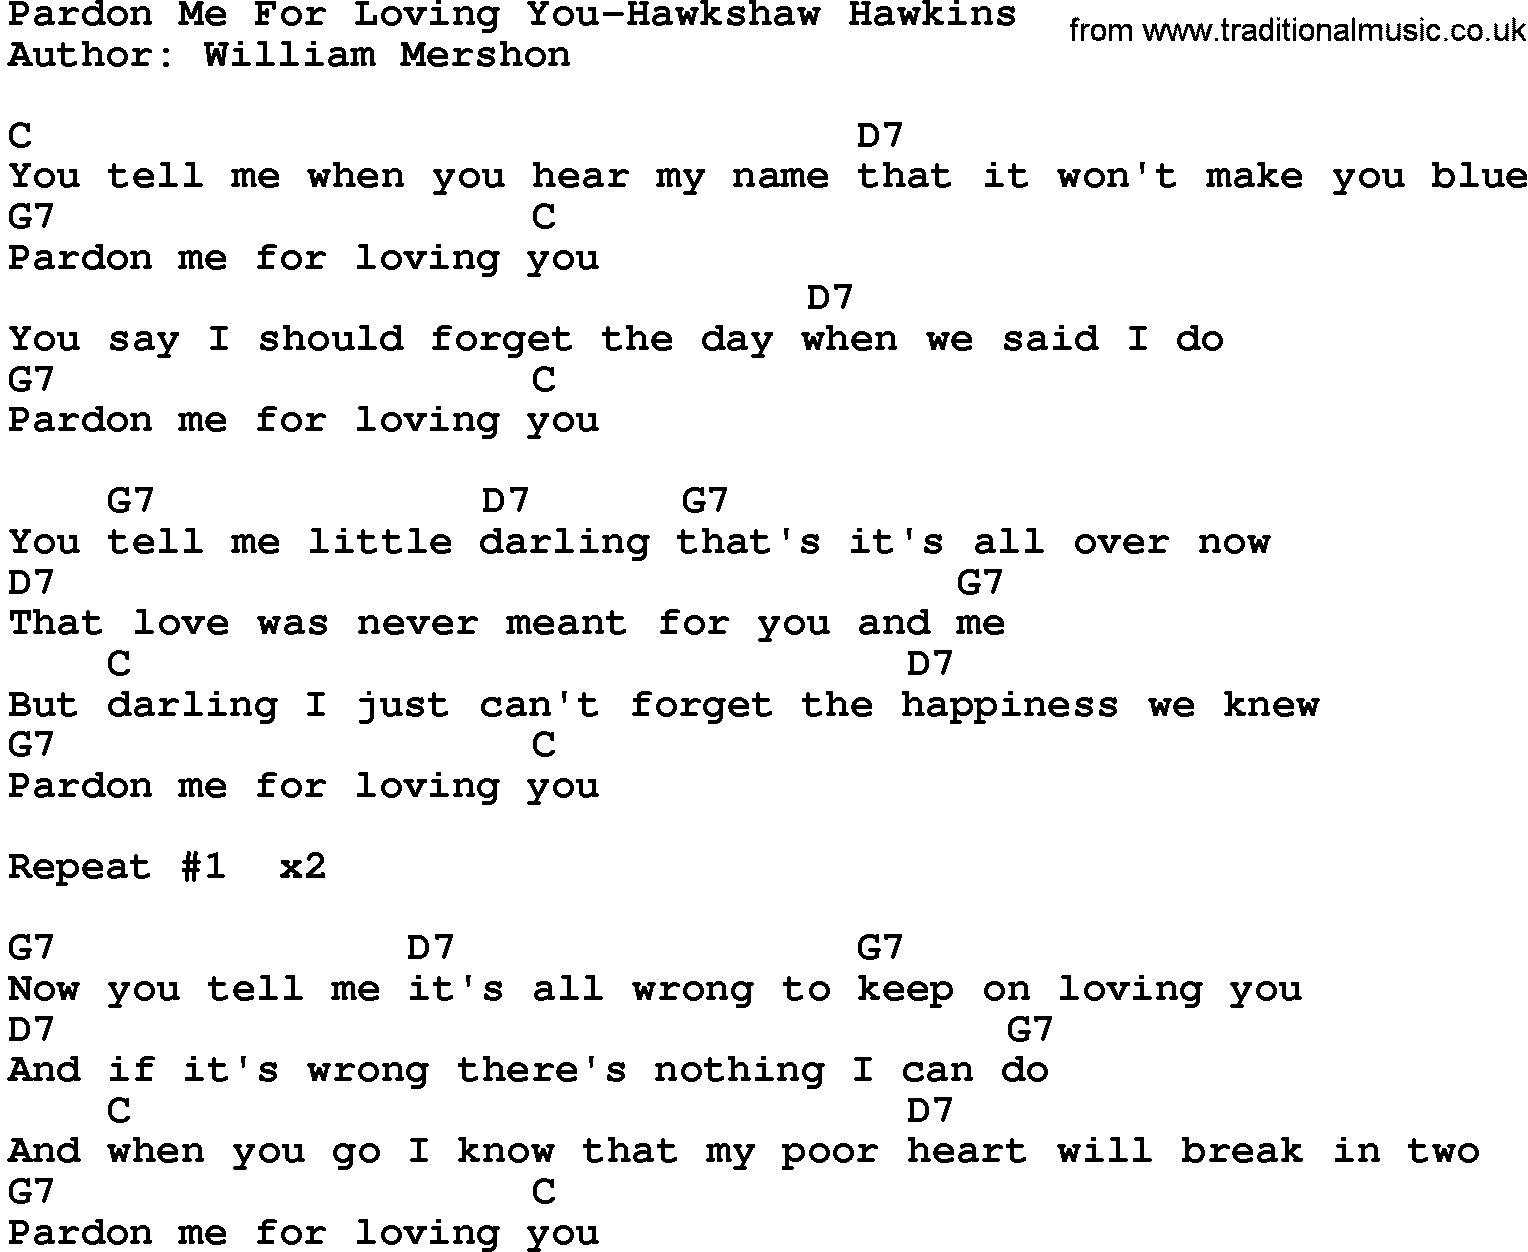 Country music song: Pardon Me For Loving You-Hawkshaw Hawkins lyrics and chords